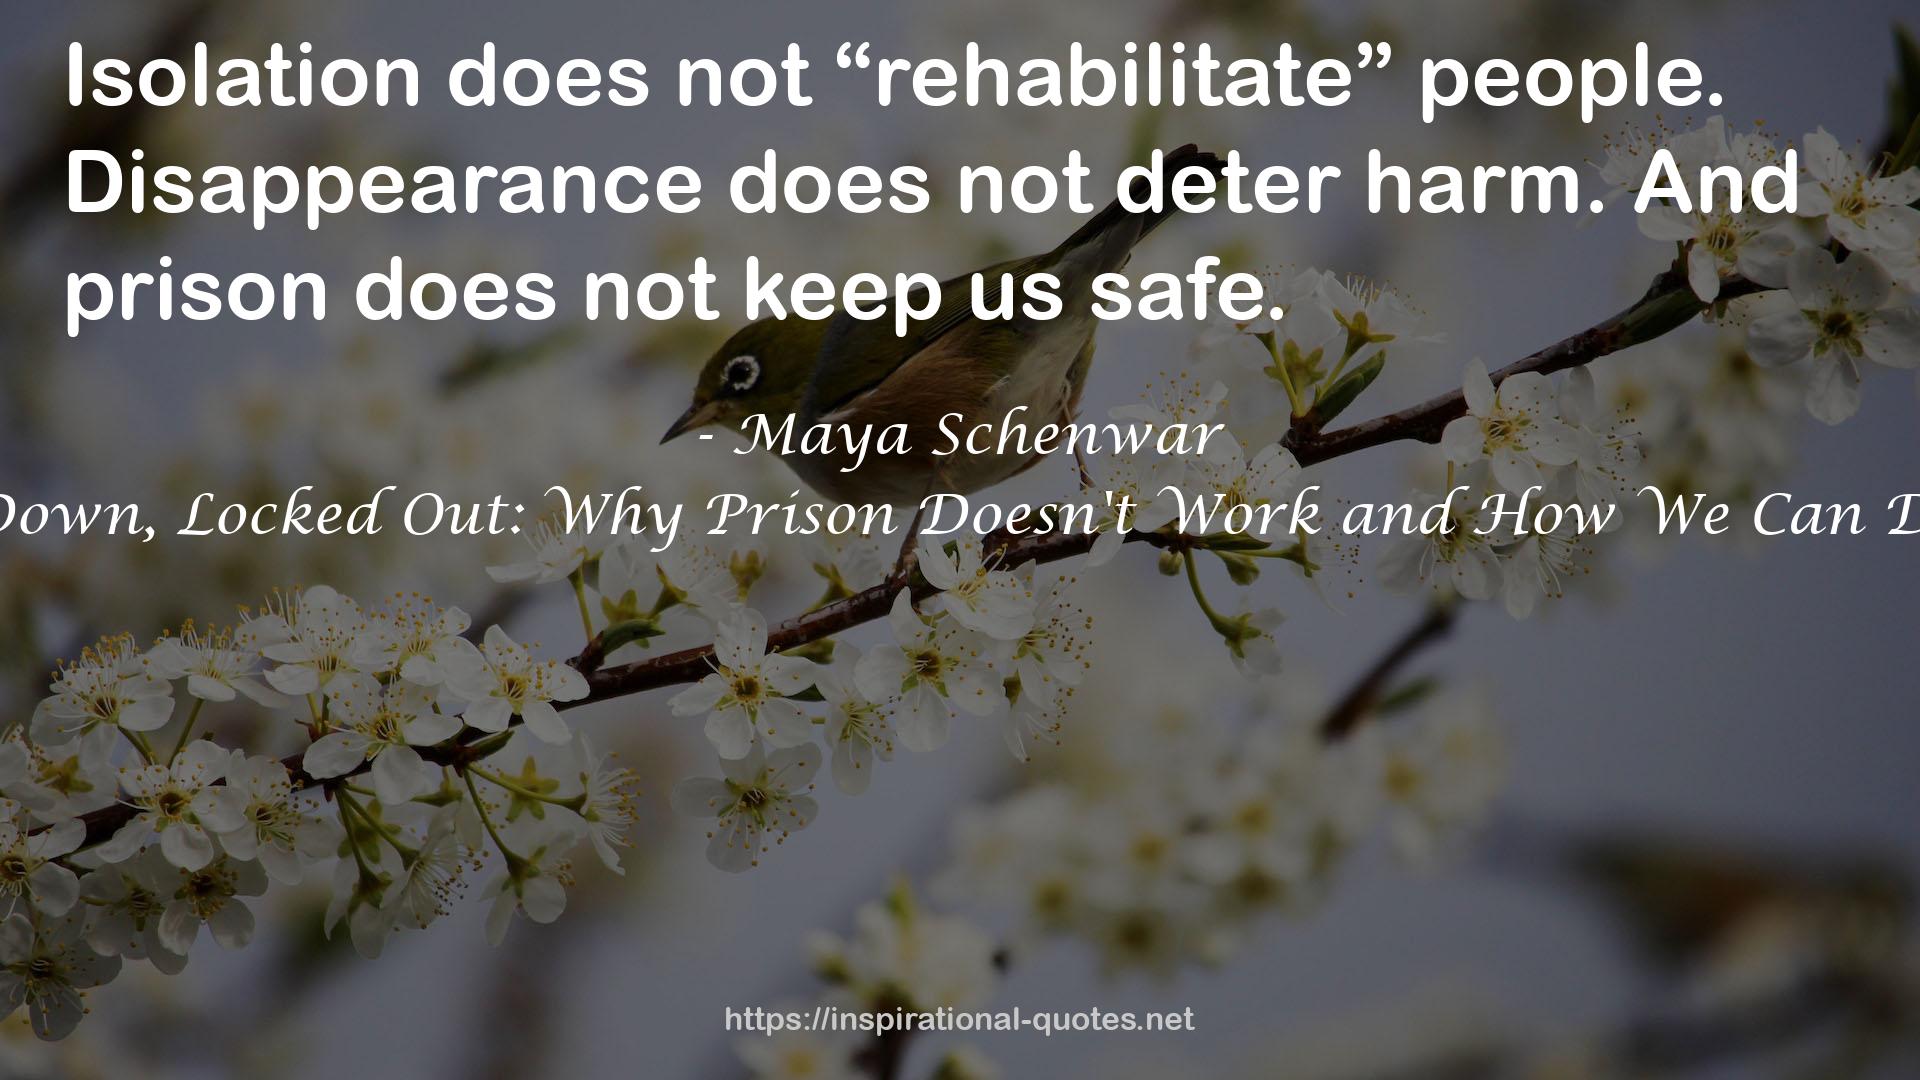 Locked Down, Locked Out: Why Prison Doesn't Work and How We Can Do Better QUOTES